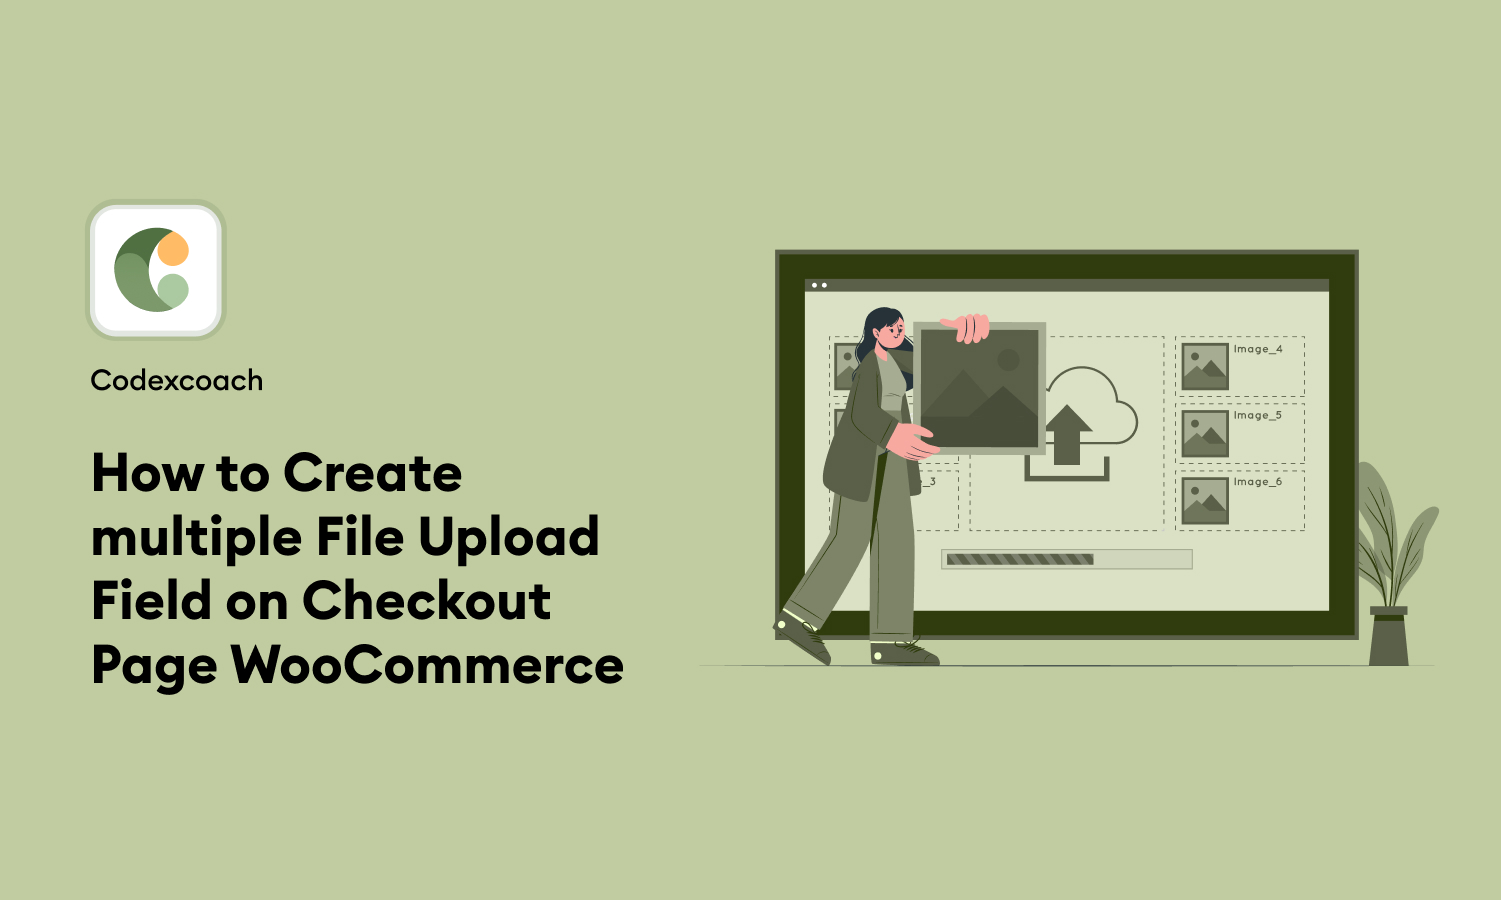 How to Create multiple File Upload Field on Checkout Page WooCommerce